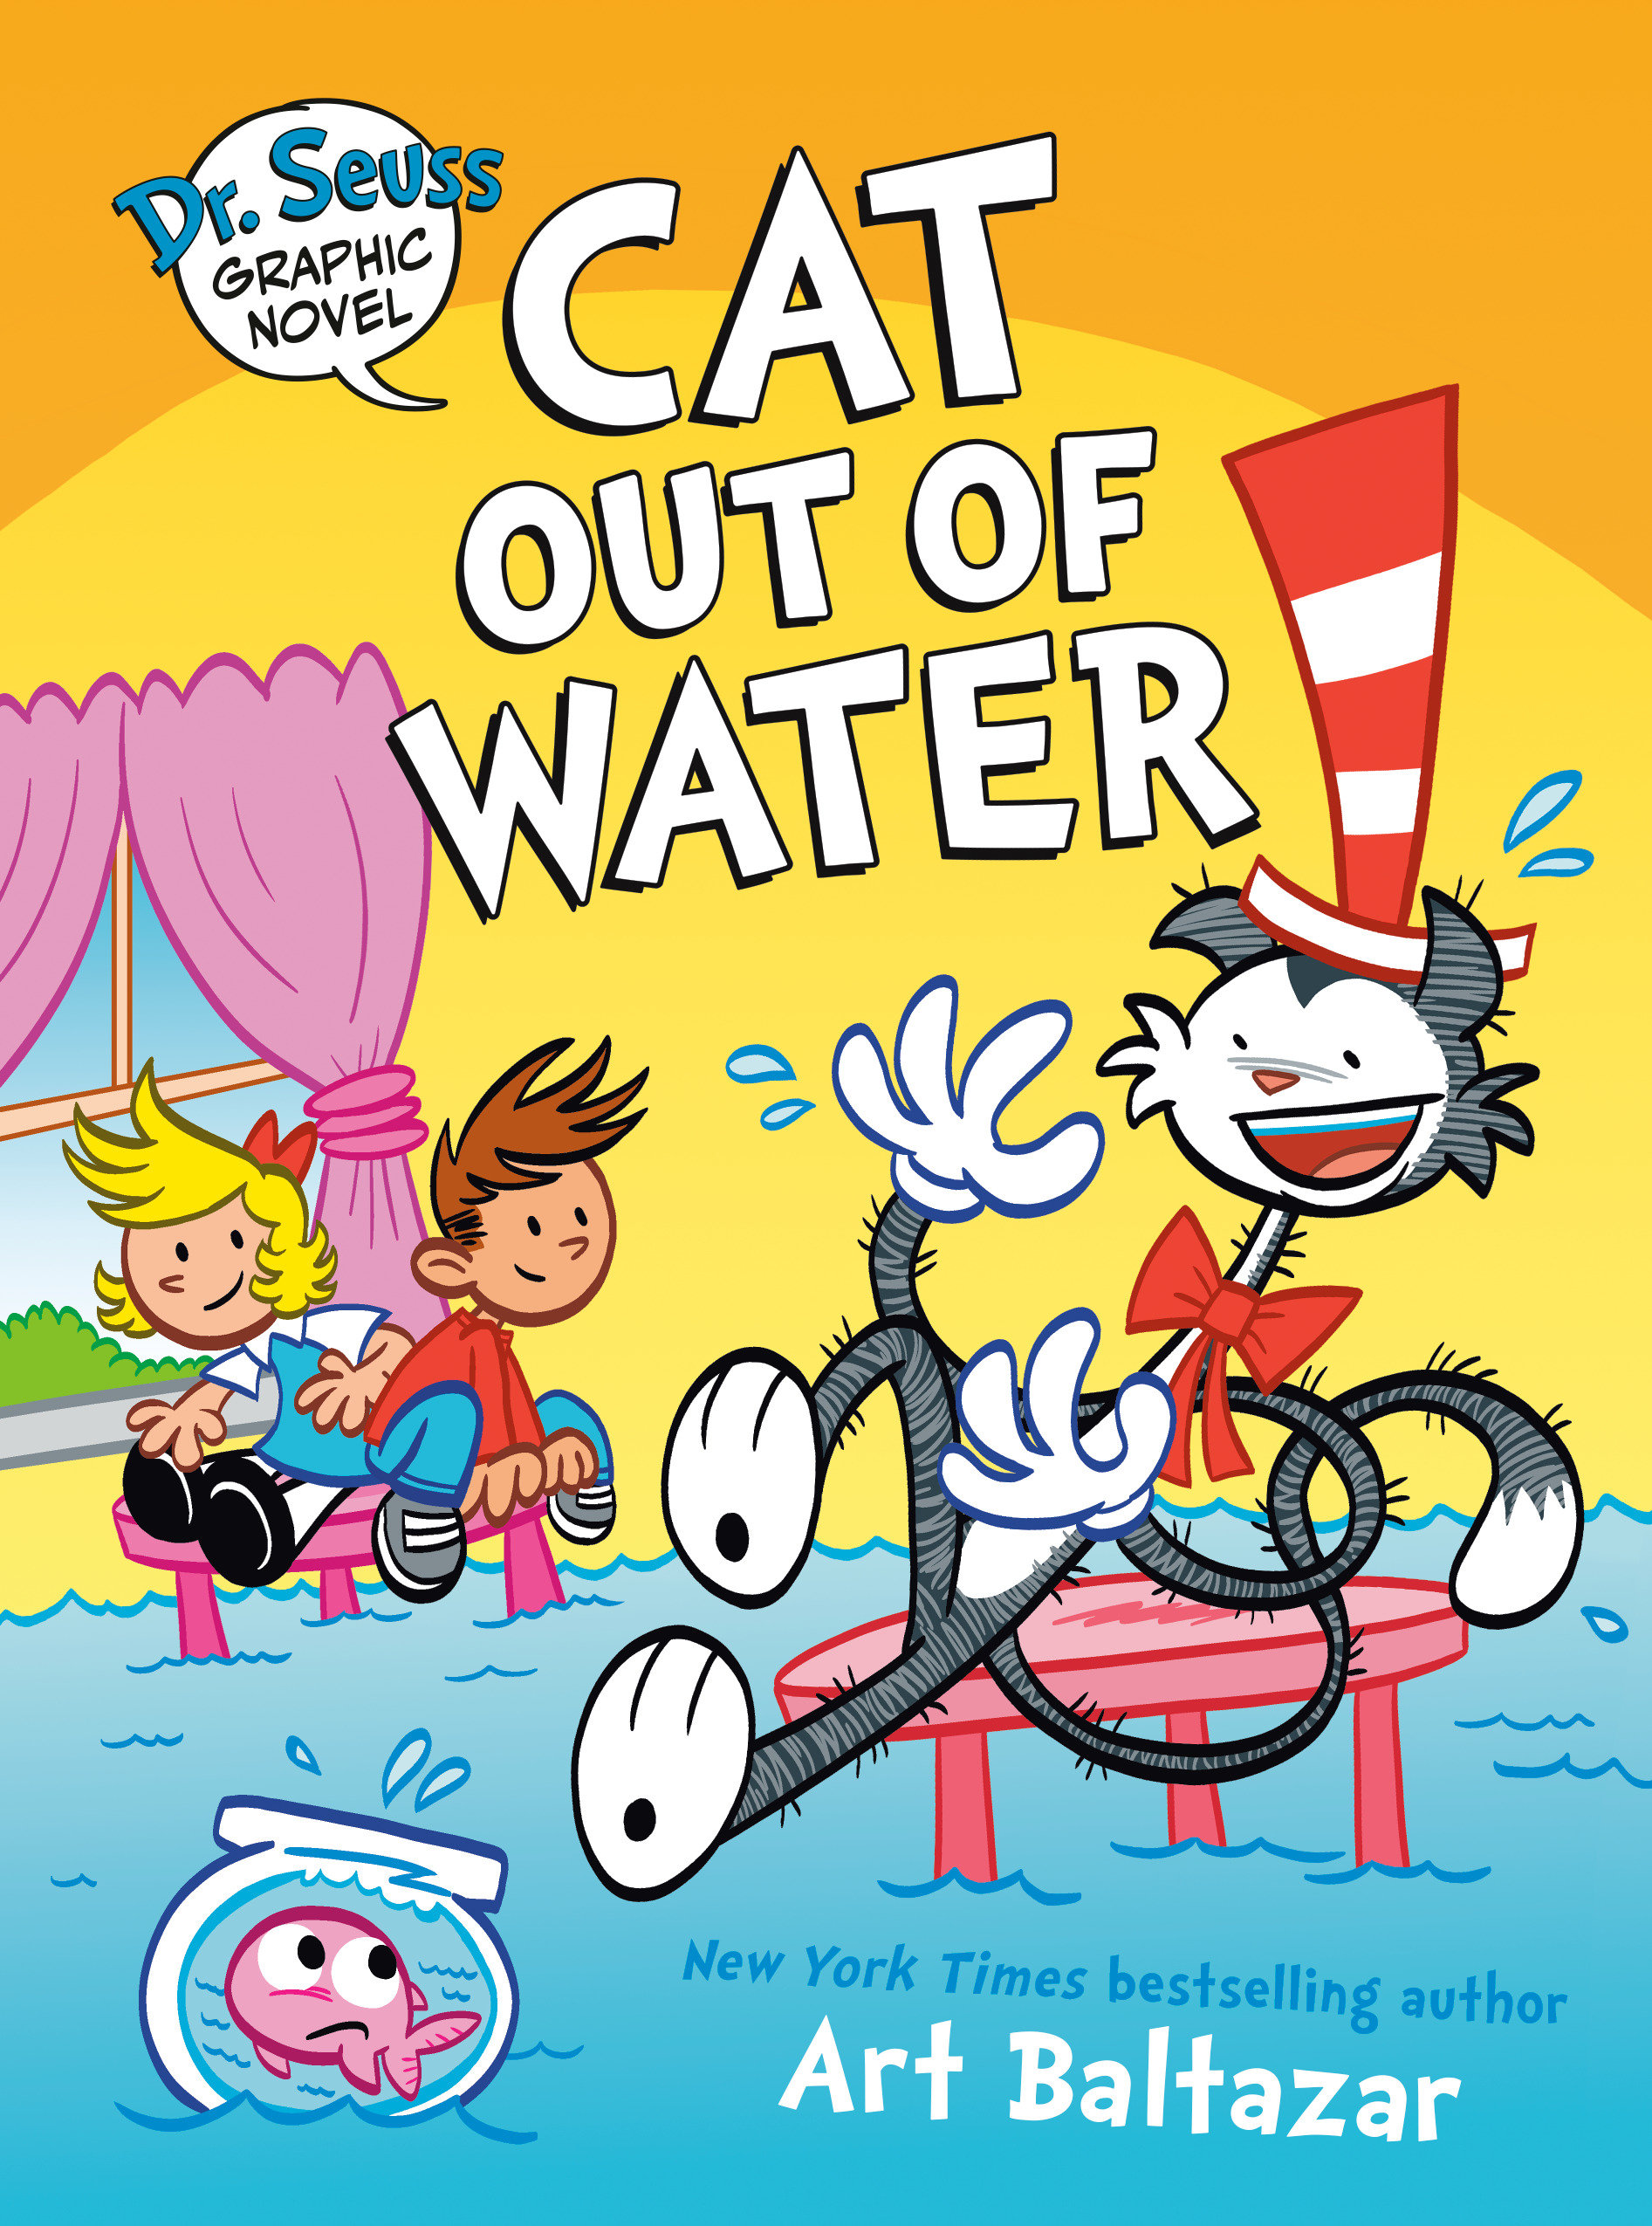 Dr. Seuss Graphic Novel: Cat Out Of Water